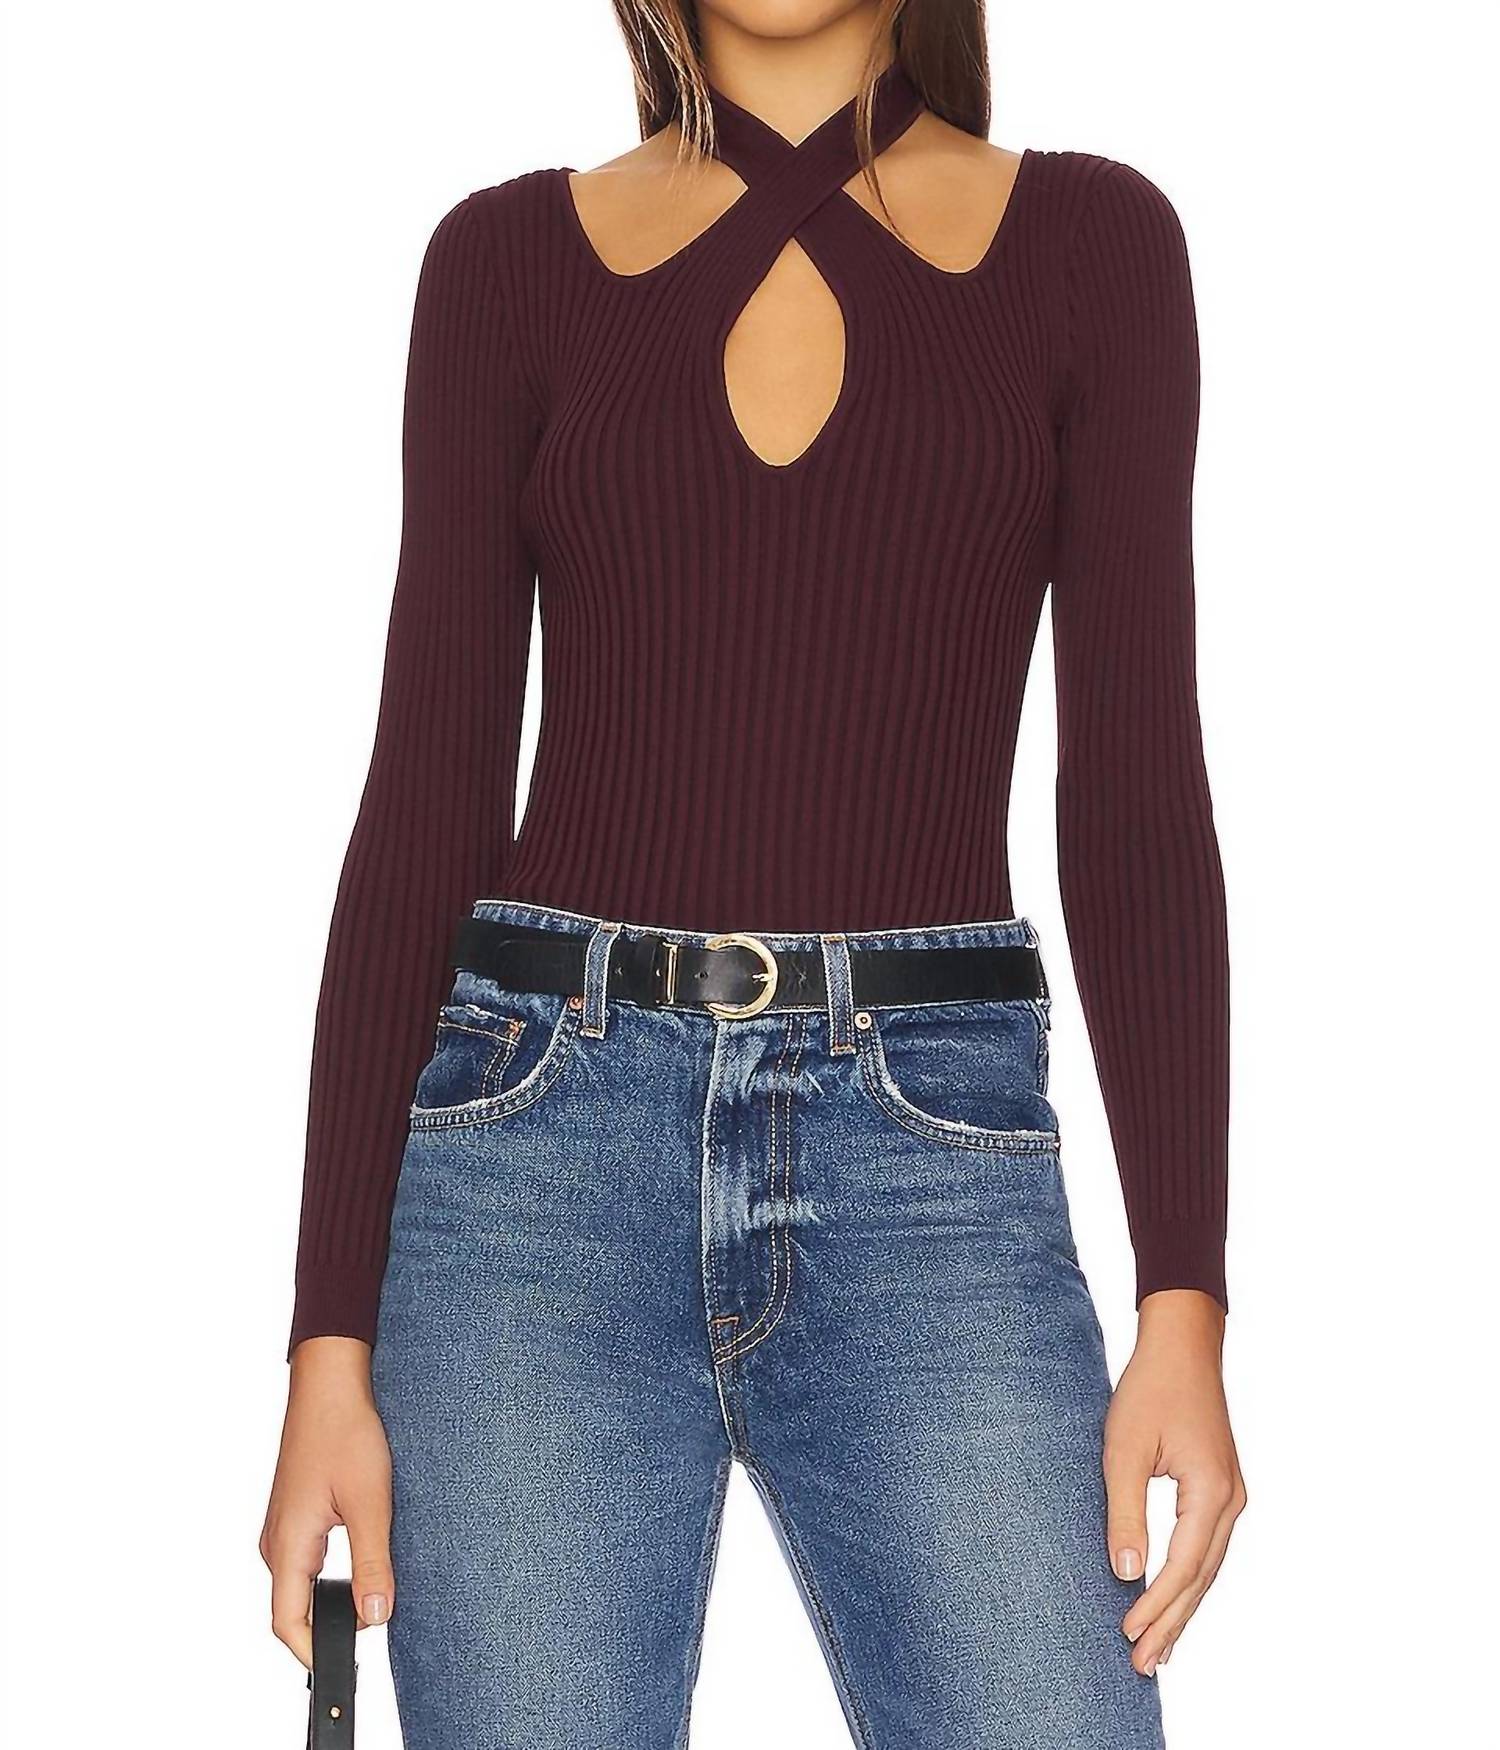 MINKPINK Gianna Knit Top in Chocolate